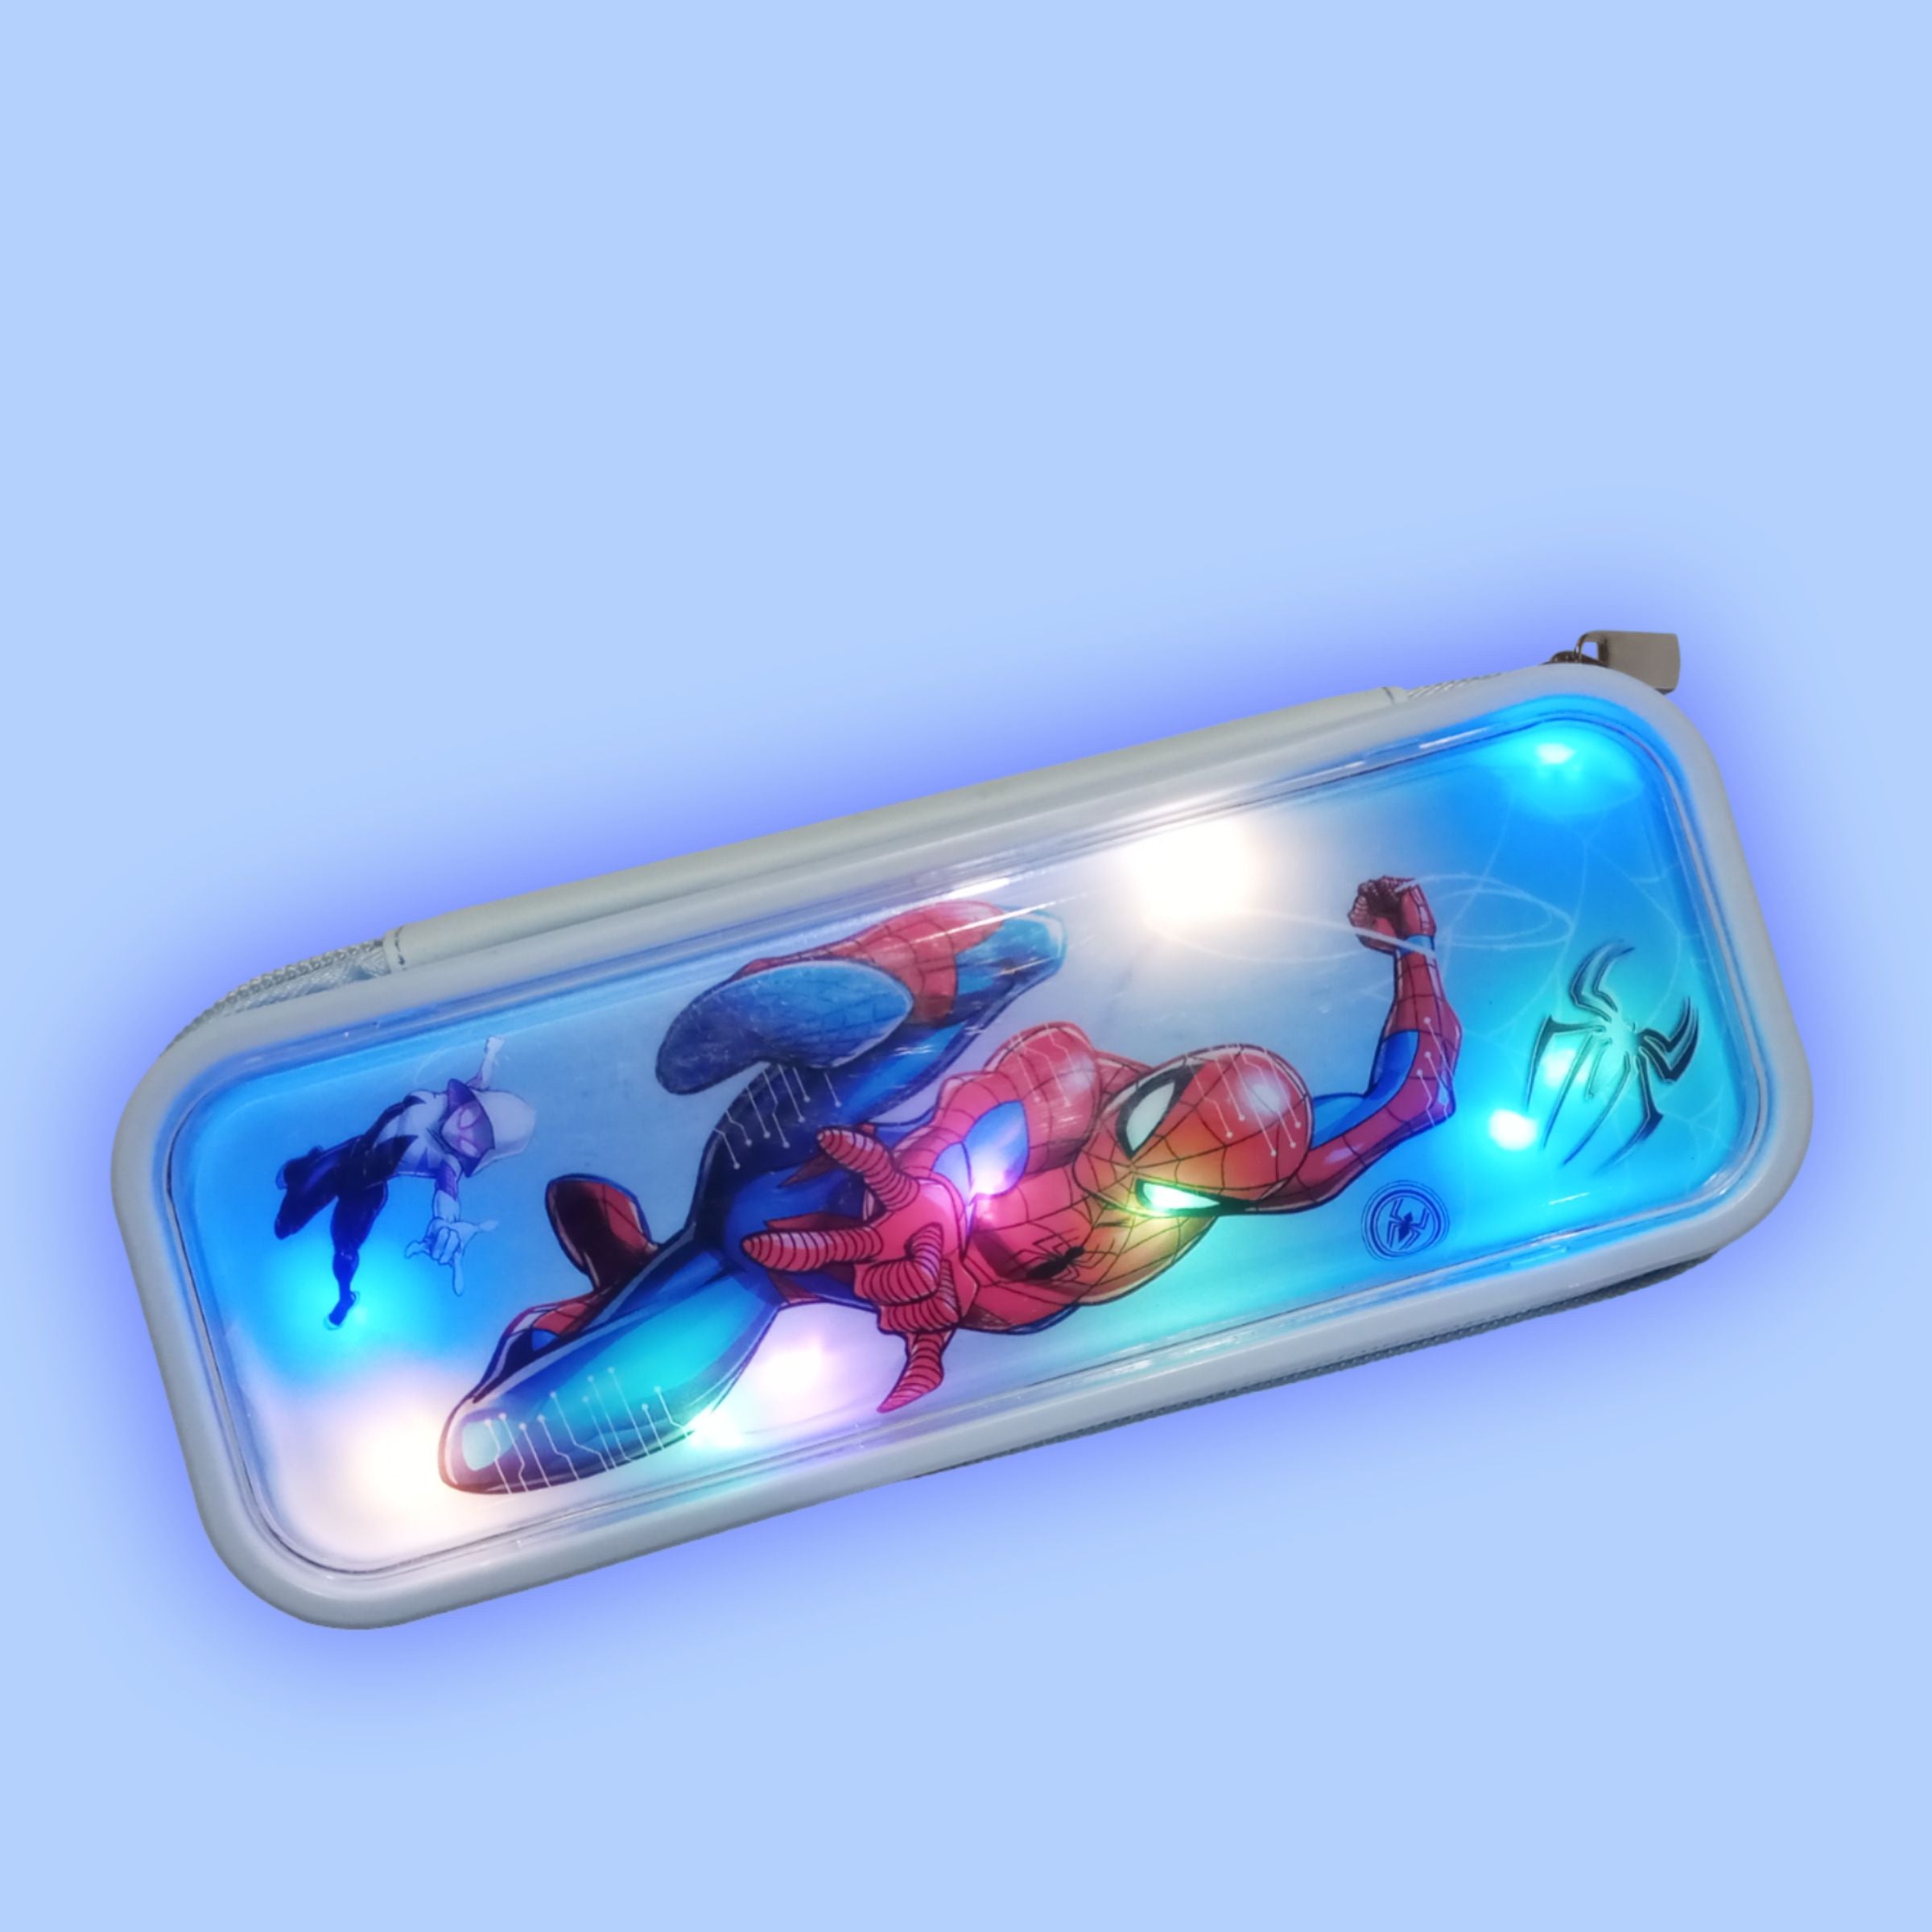 Spiderman Pencil Pouch With Colorful LED Lights